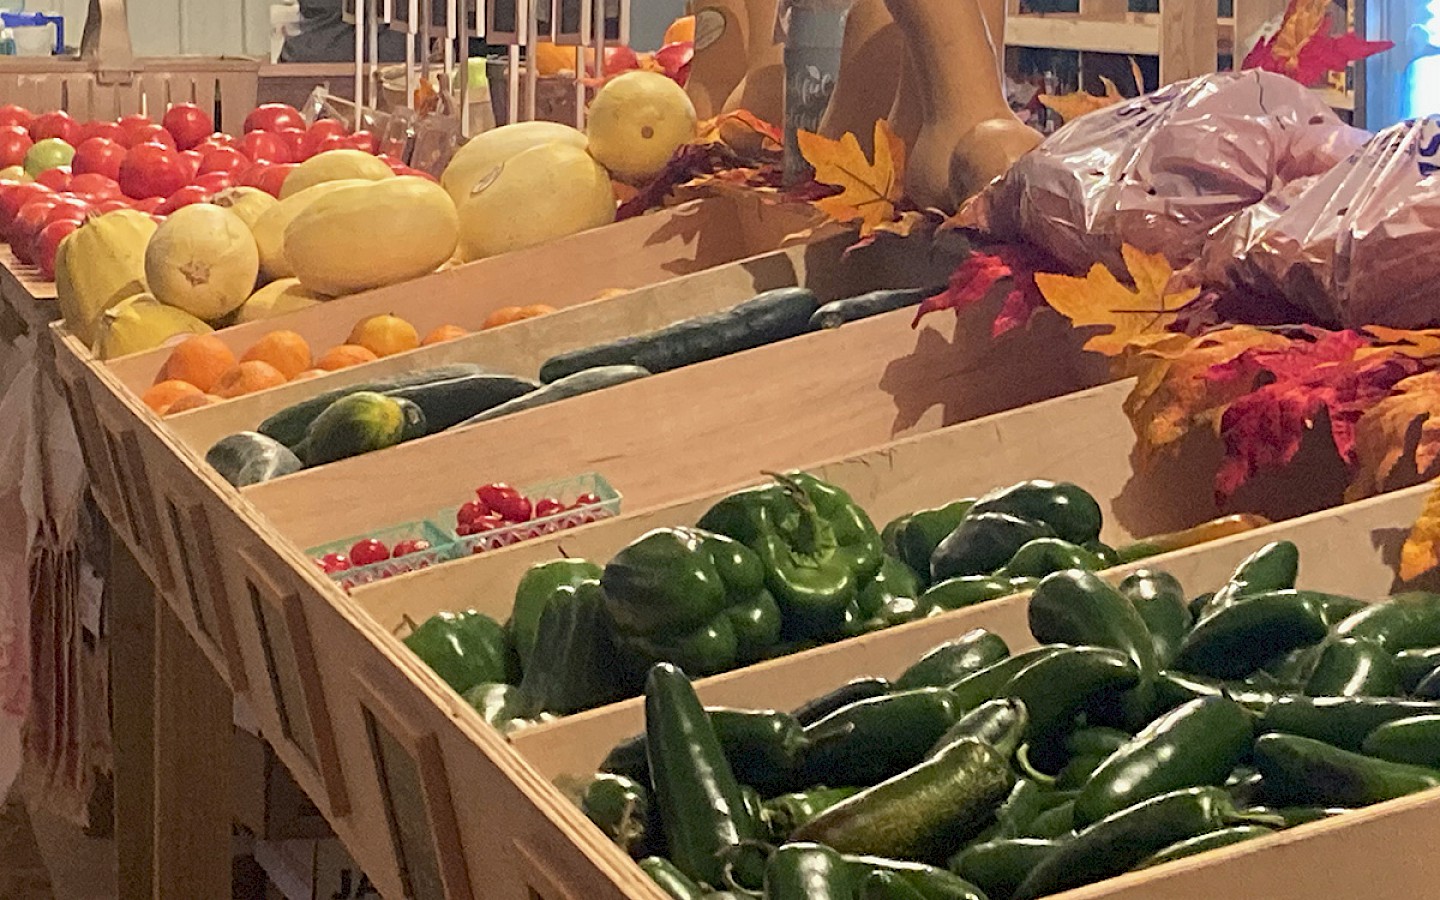 bell peppers, potatoes, squash, tomatoes, and an assortment of items on a long wooden display rack